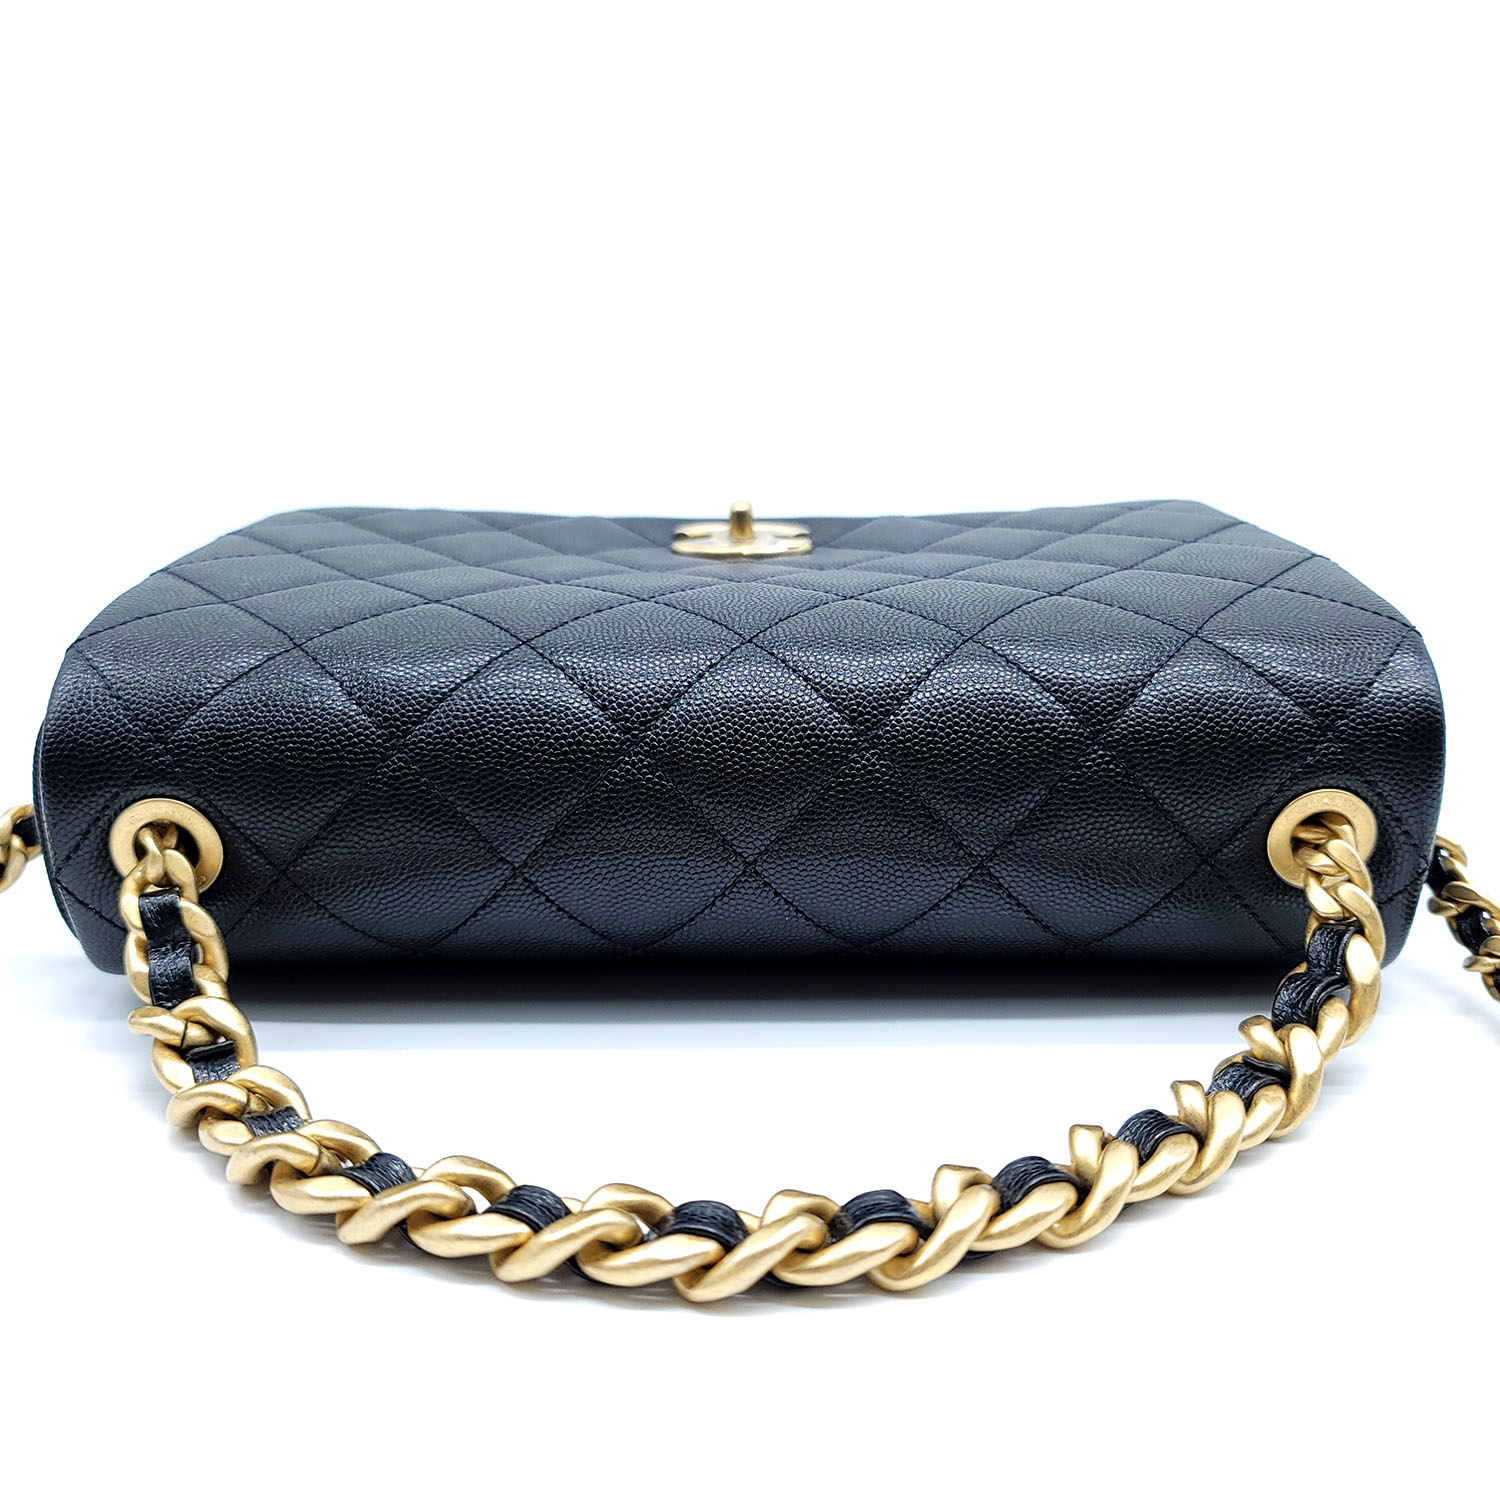 Chanel Flap Bag Black Quilted Caviar